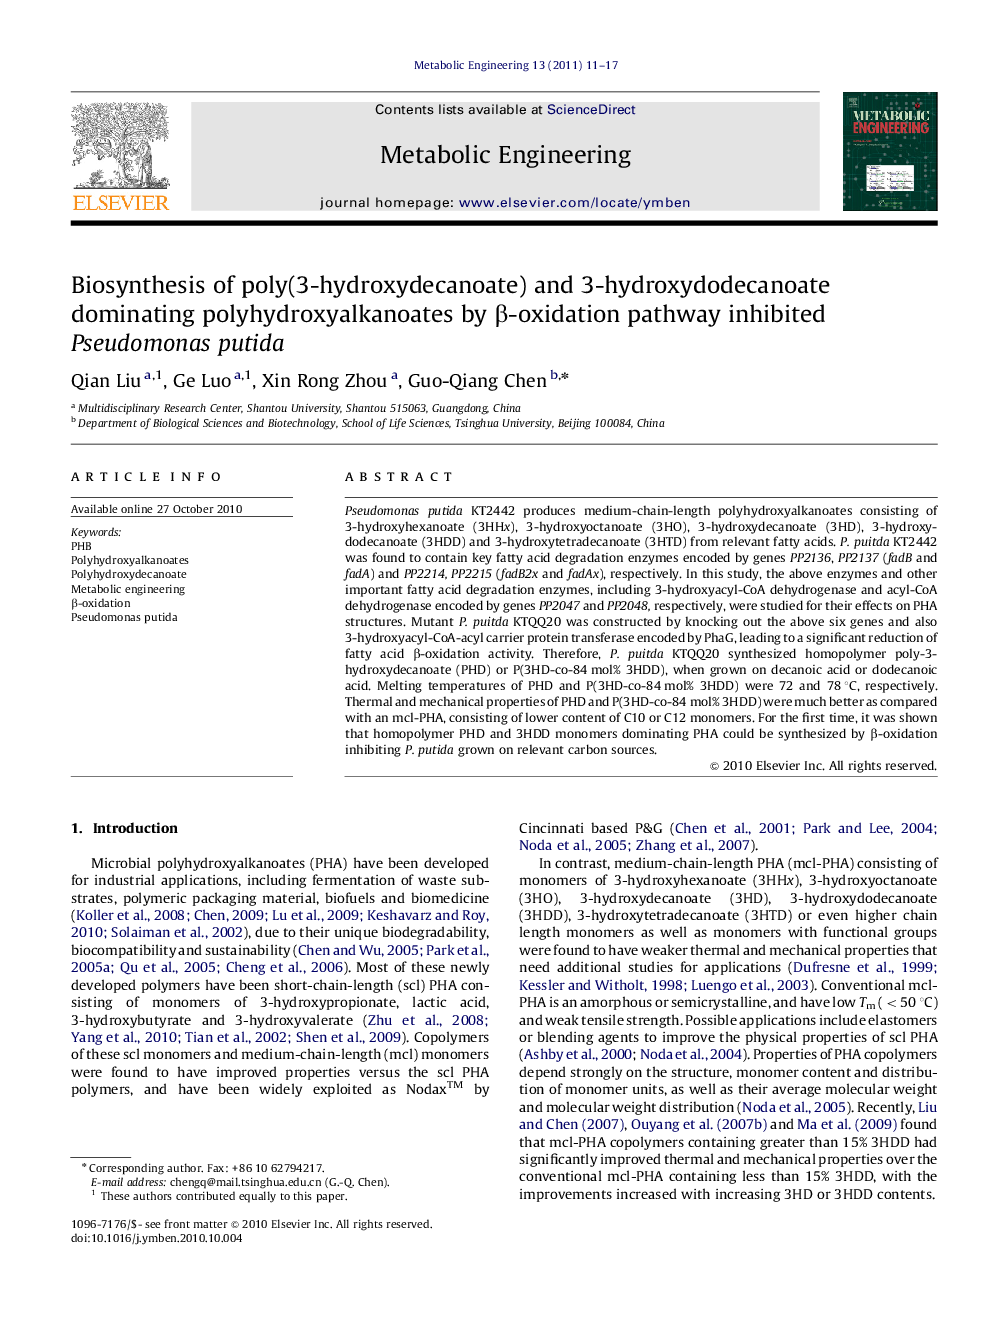 Biosynthesis of poly(3-hydroxydecanoate) and 3-hydroxydodecanoate dominating polyhydroxyalkanoates by β-oxidation pathway inhibited Pseudomonas putida